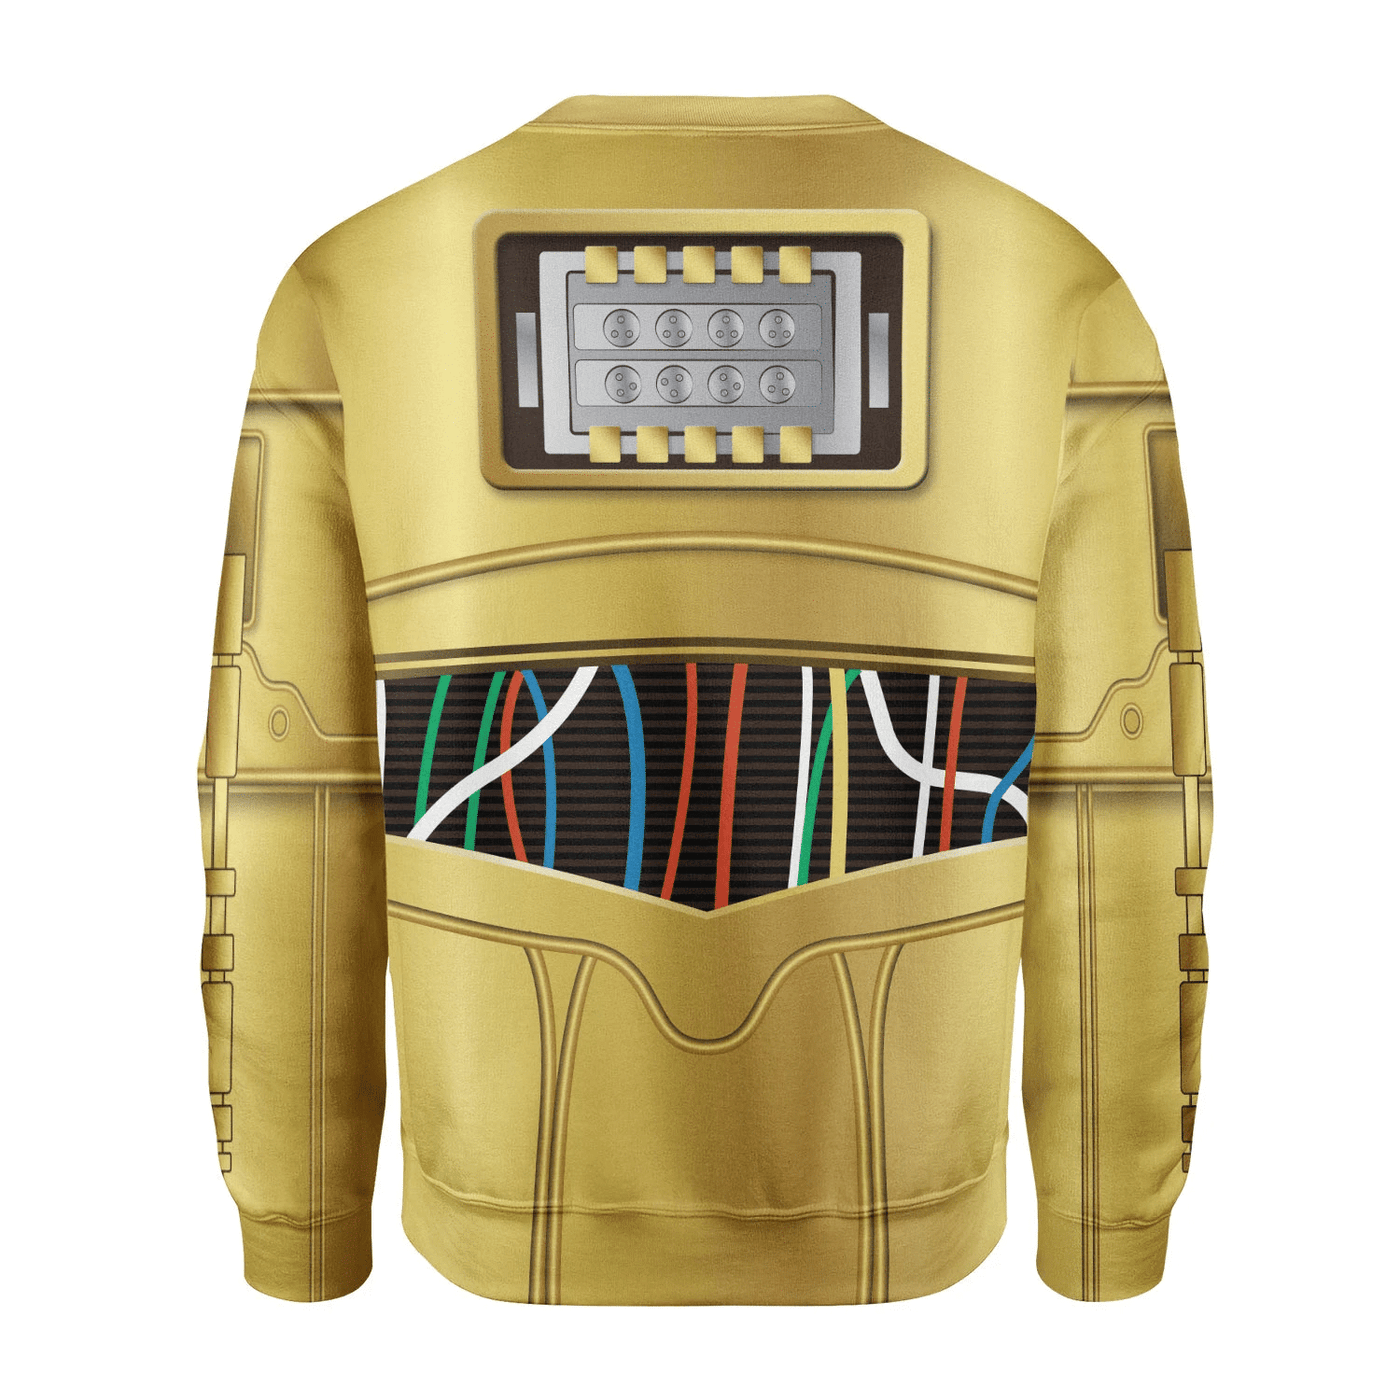 Star Wars Star Wars Golden Style - Sweater - Ugly Christmas Sweater